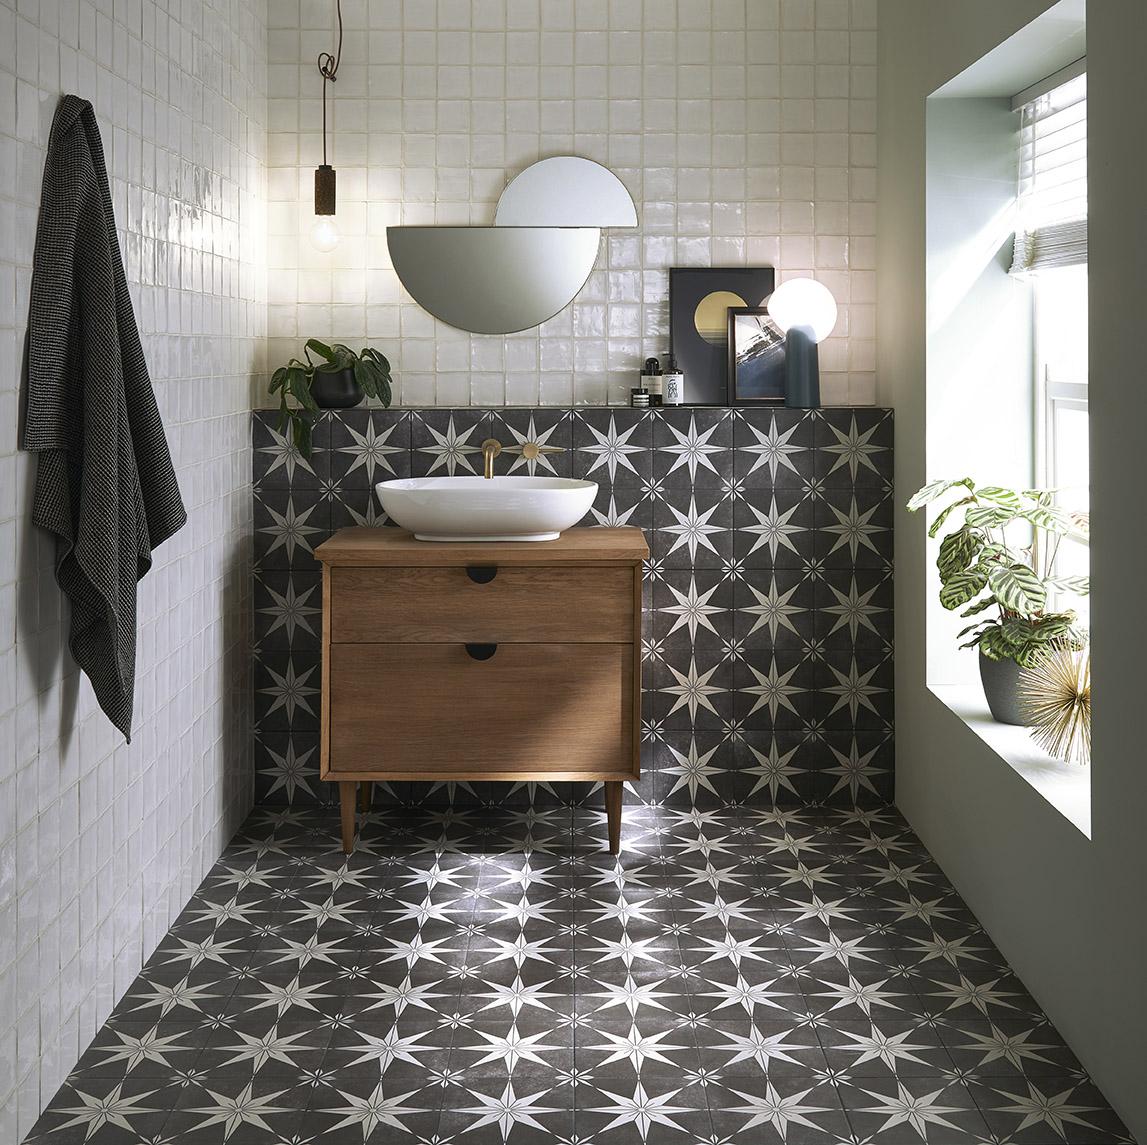 Clean Grout On Floor And Wall Tile, Are Black Shower Tiles Hard To Keep Clean